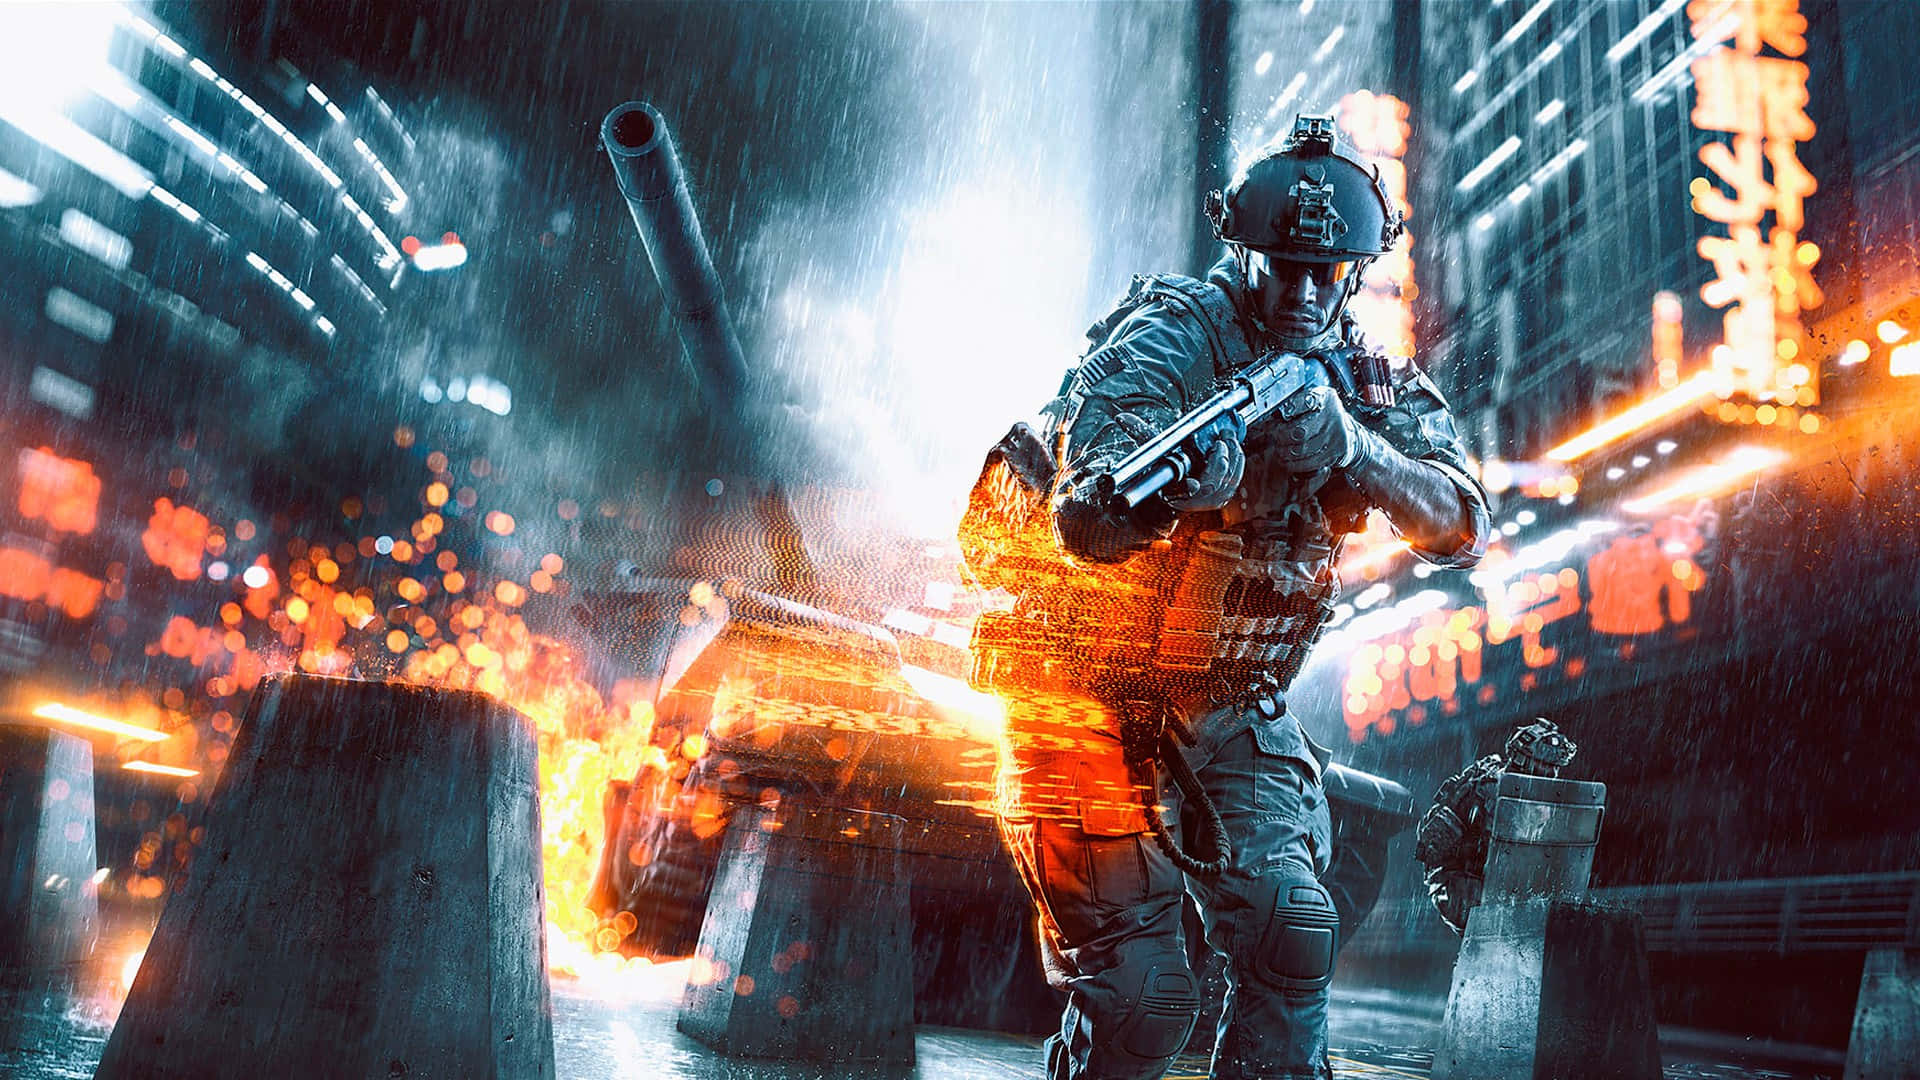 Take in the beauty of the Battlefield 4 video game as you prepare for your next mission.